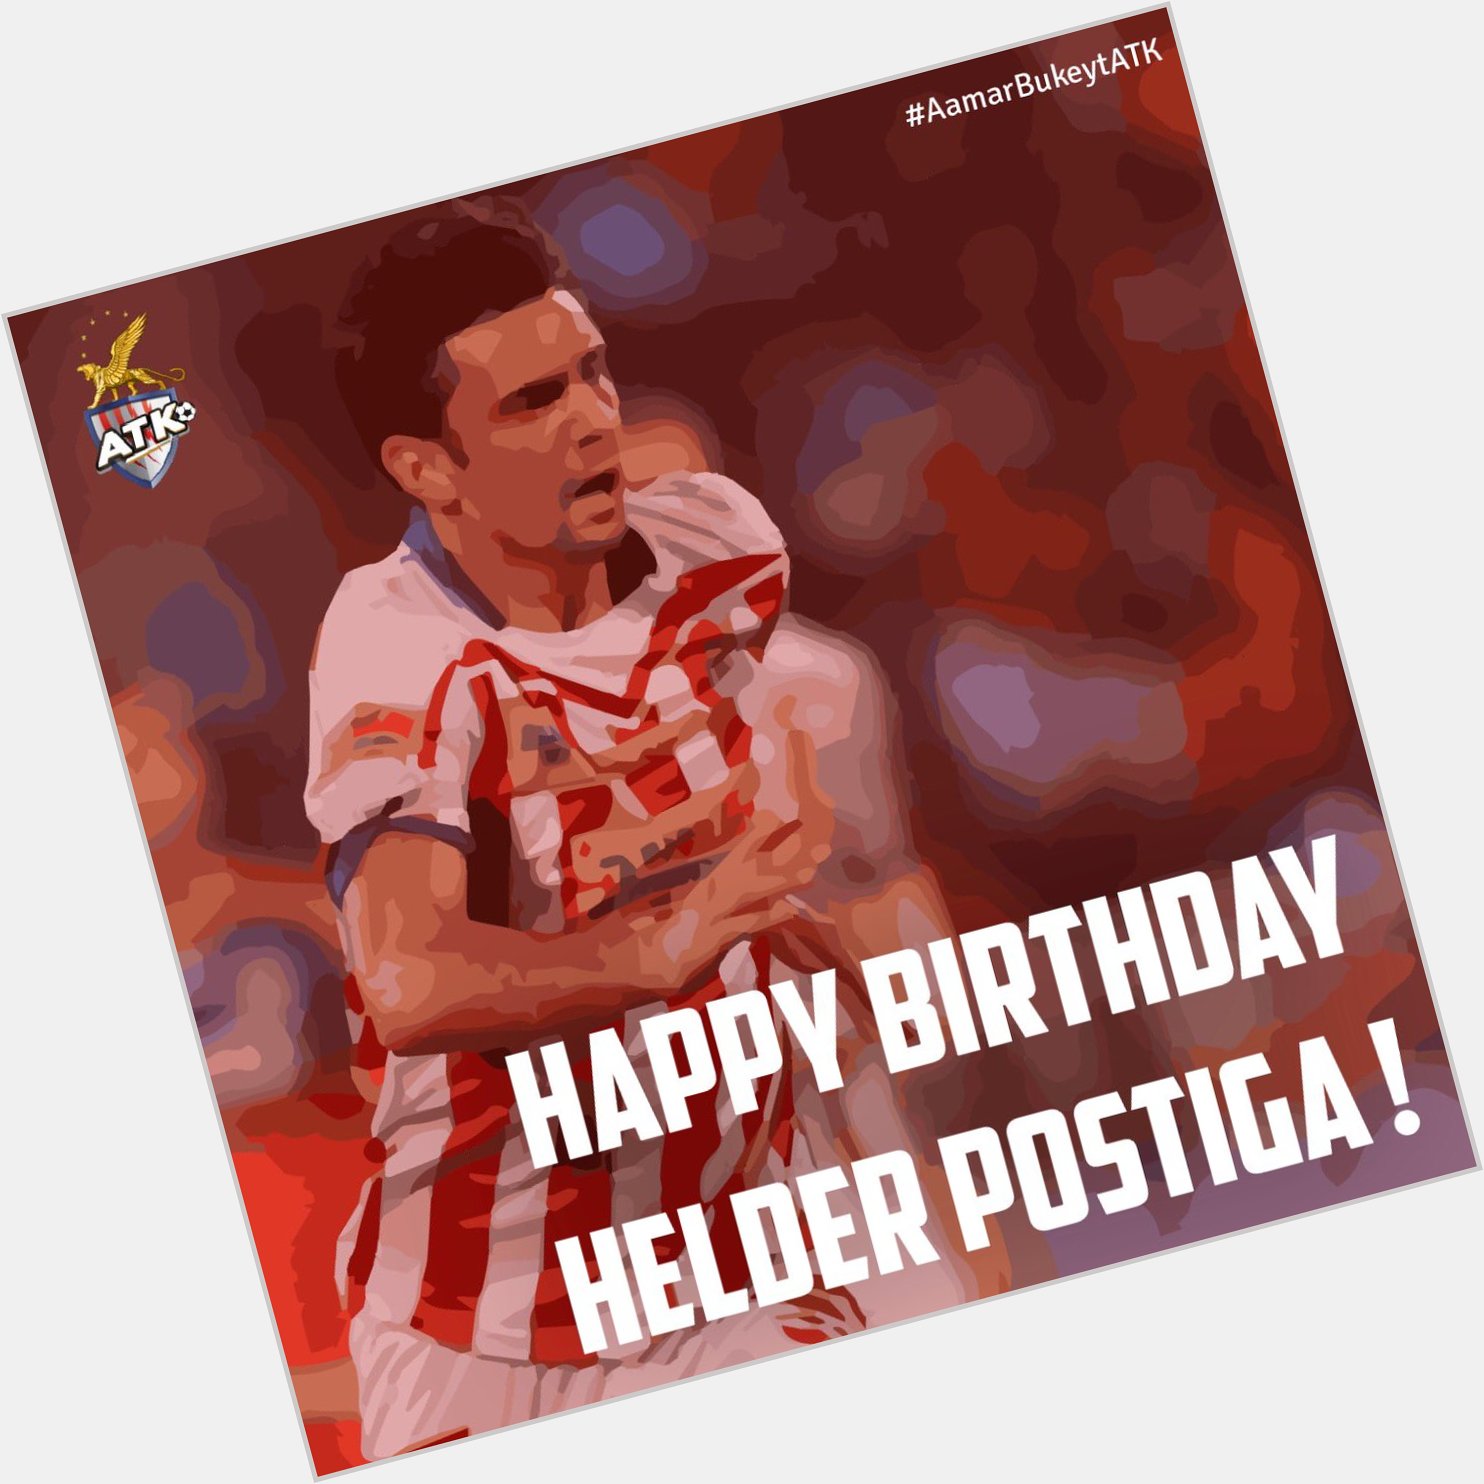 Happy birthday to our former Super Striker, Helder Postiga!

The Portuguese star turns 36 today! 